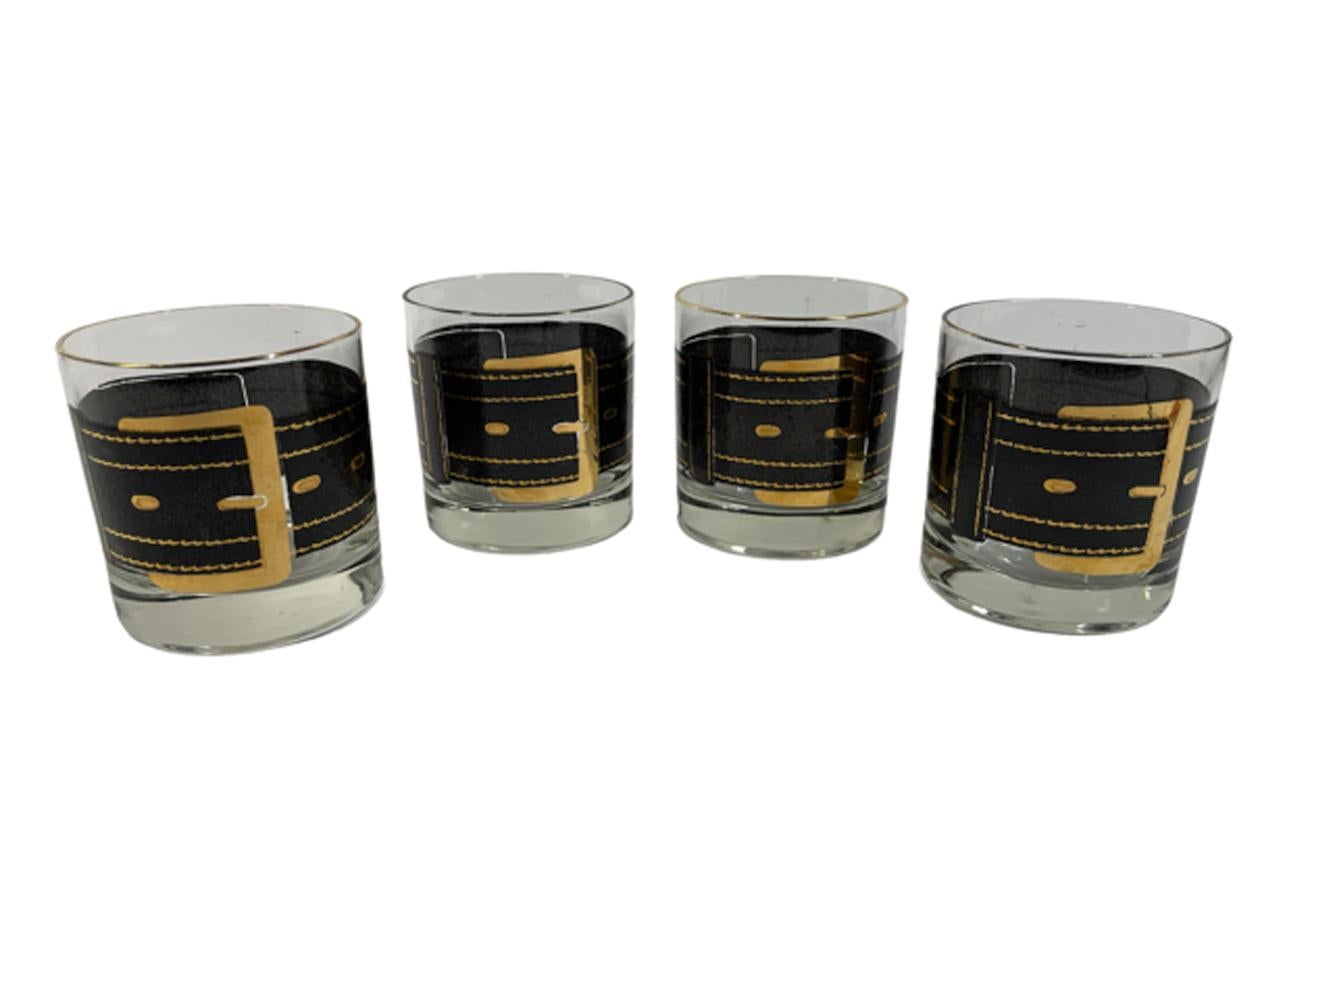 Mid-Century Modern rocks glasses with a wide textured black band imitating a grained leather belt accented with 22 karat gold stitching and large gold buckle.